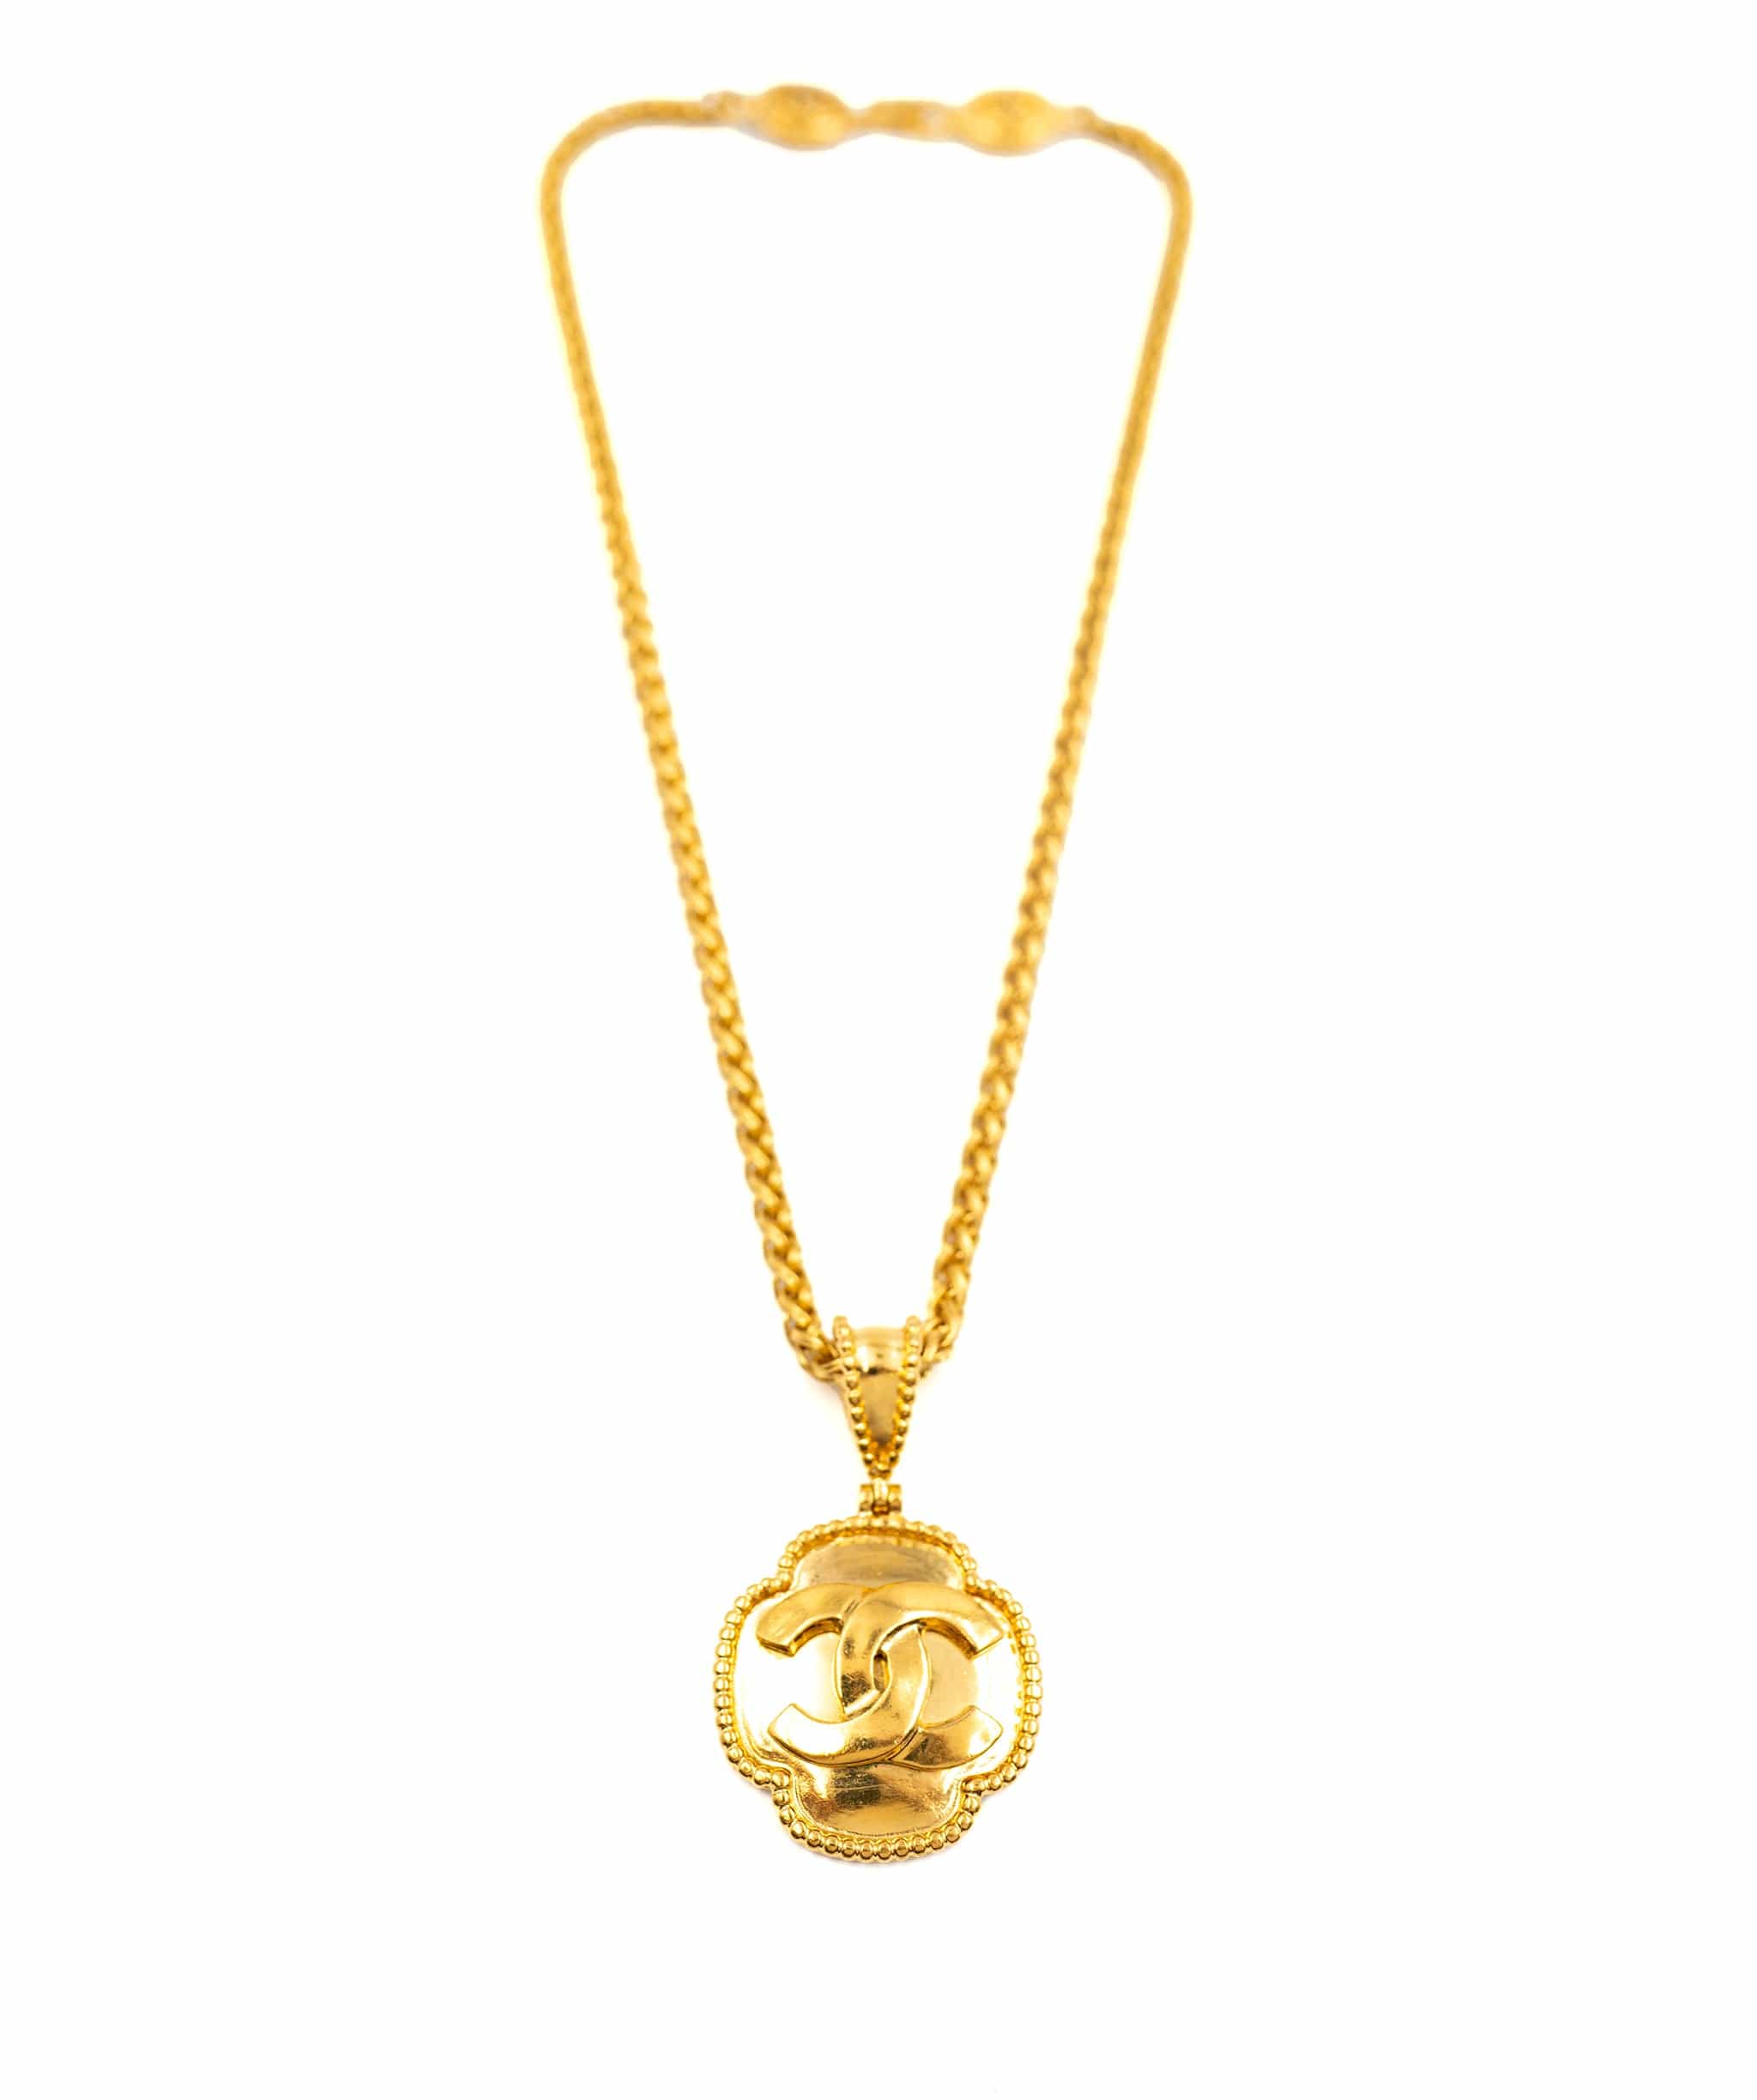 Chanel Chanel Vintage Clover Pendant with CC logo Necklace - AWL3619